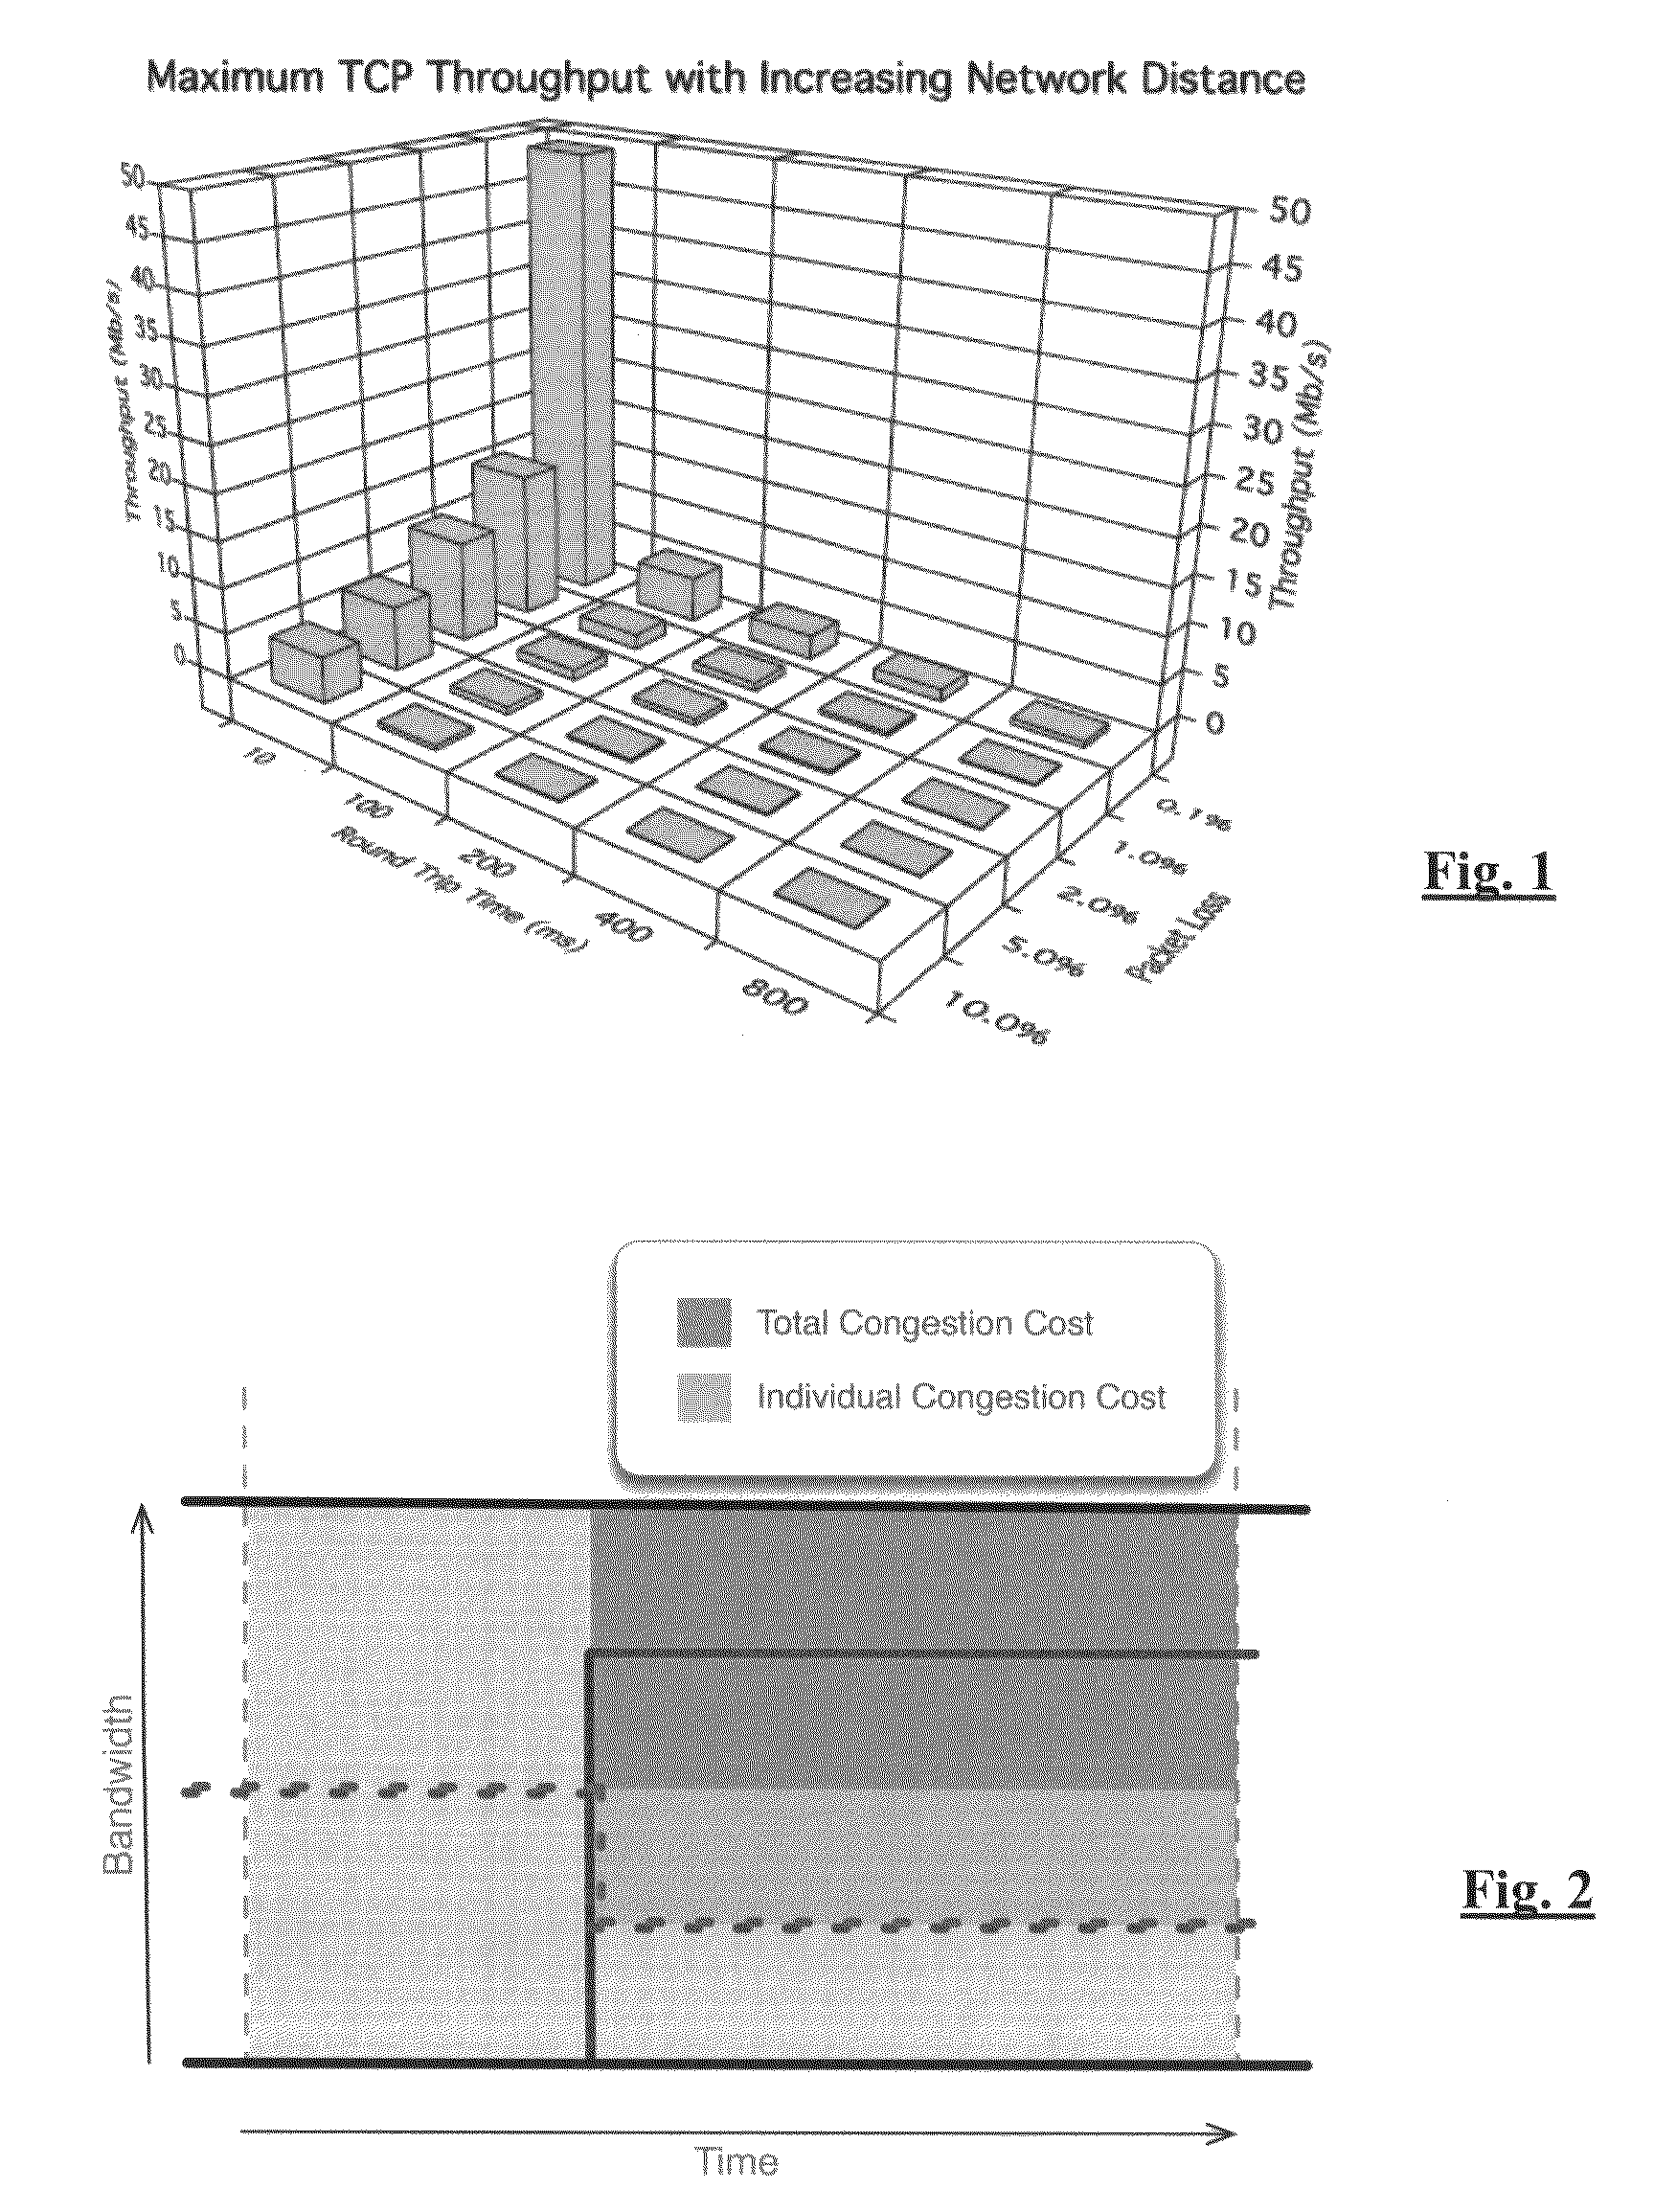 Practical model for high speed file delivery services supporting guaranteed delivery times and differentiated service levels